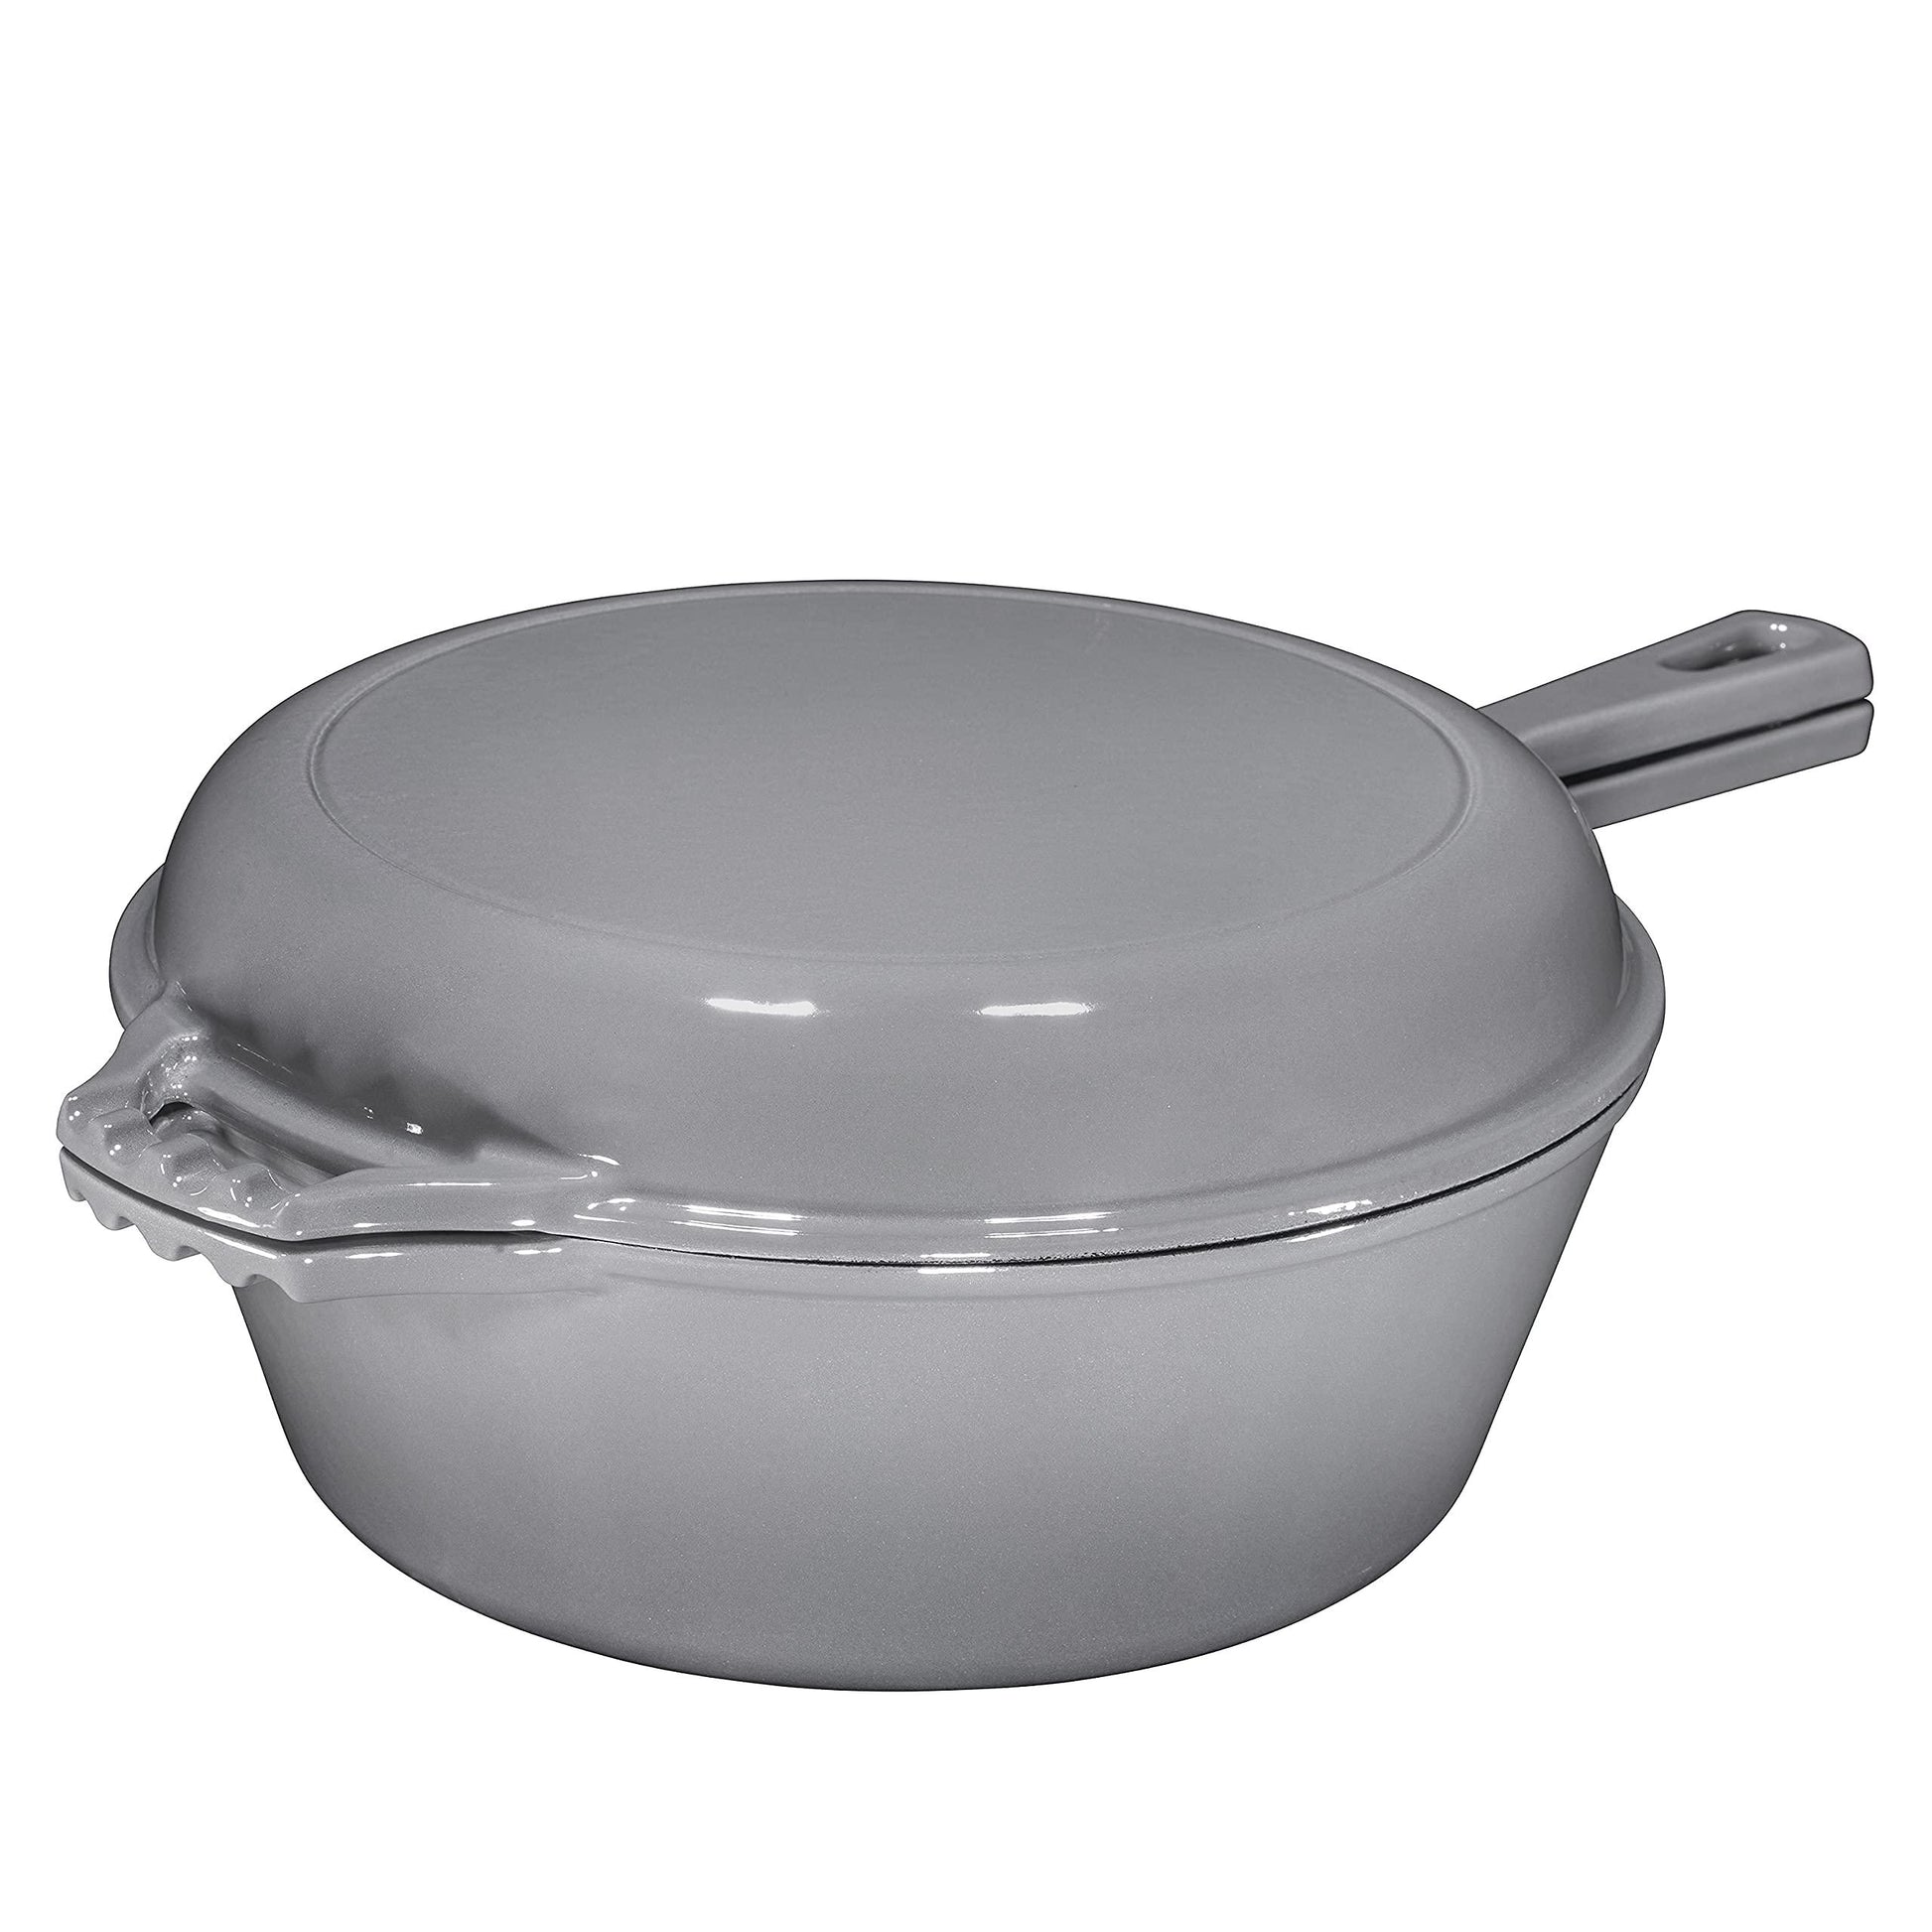 Bruntmor 2 in 1 Enameled cast iron pot with lid, 5QT Cast Iron Dutch Oven & Skillet Combo, Enameled Cast Iron Cookware with Lid, Perfect for Braising, Casseroles and Slow Cooking - Grey - CookCave